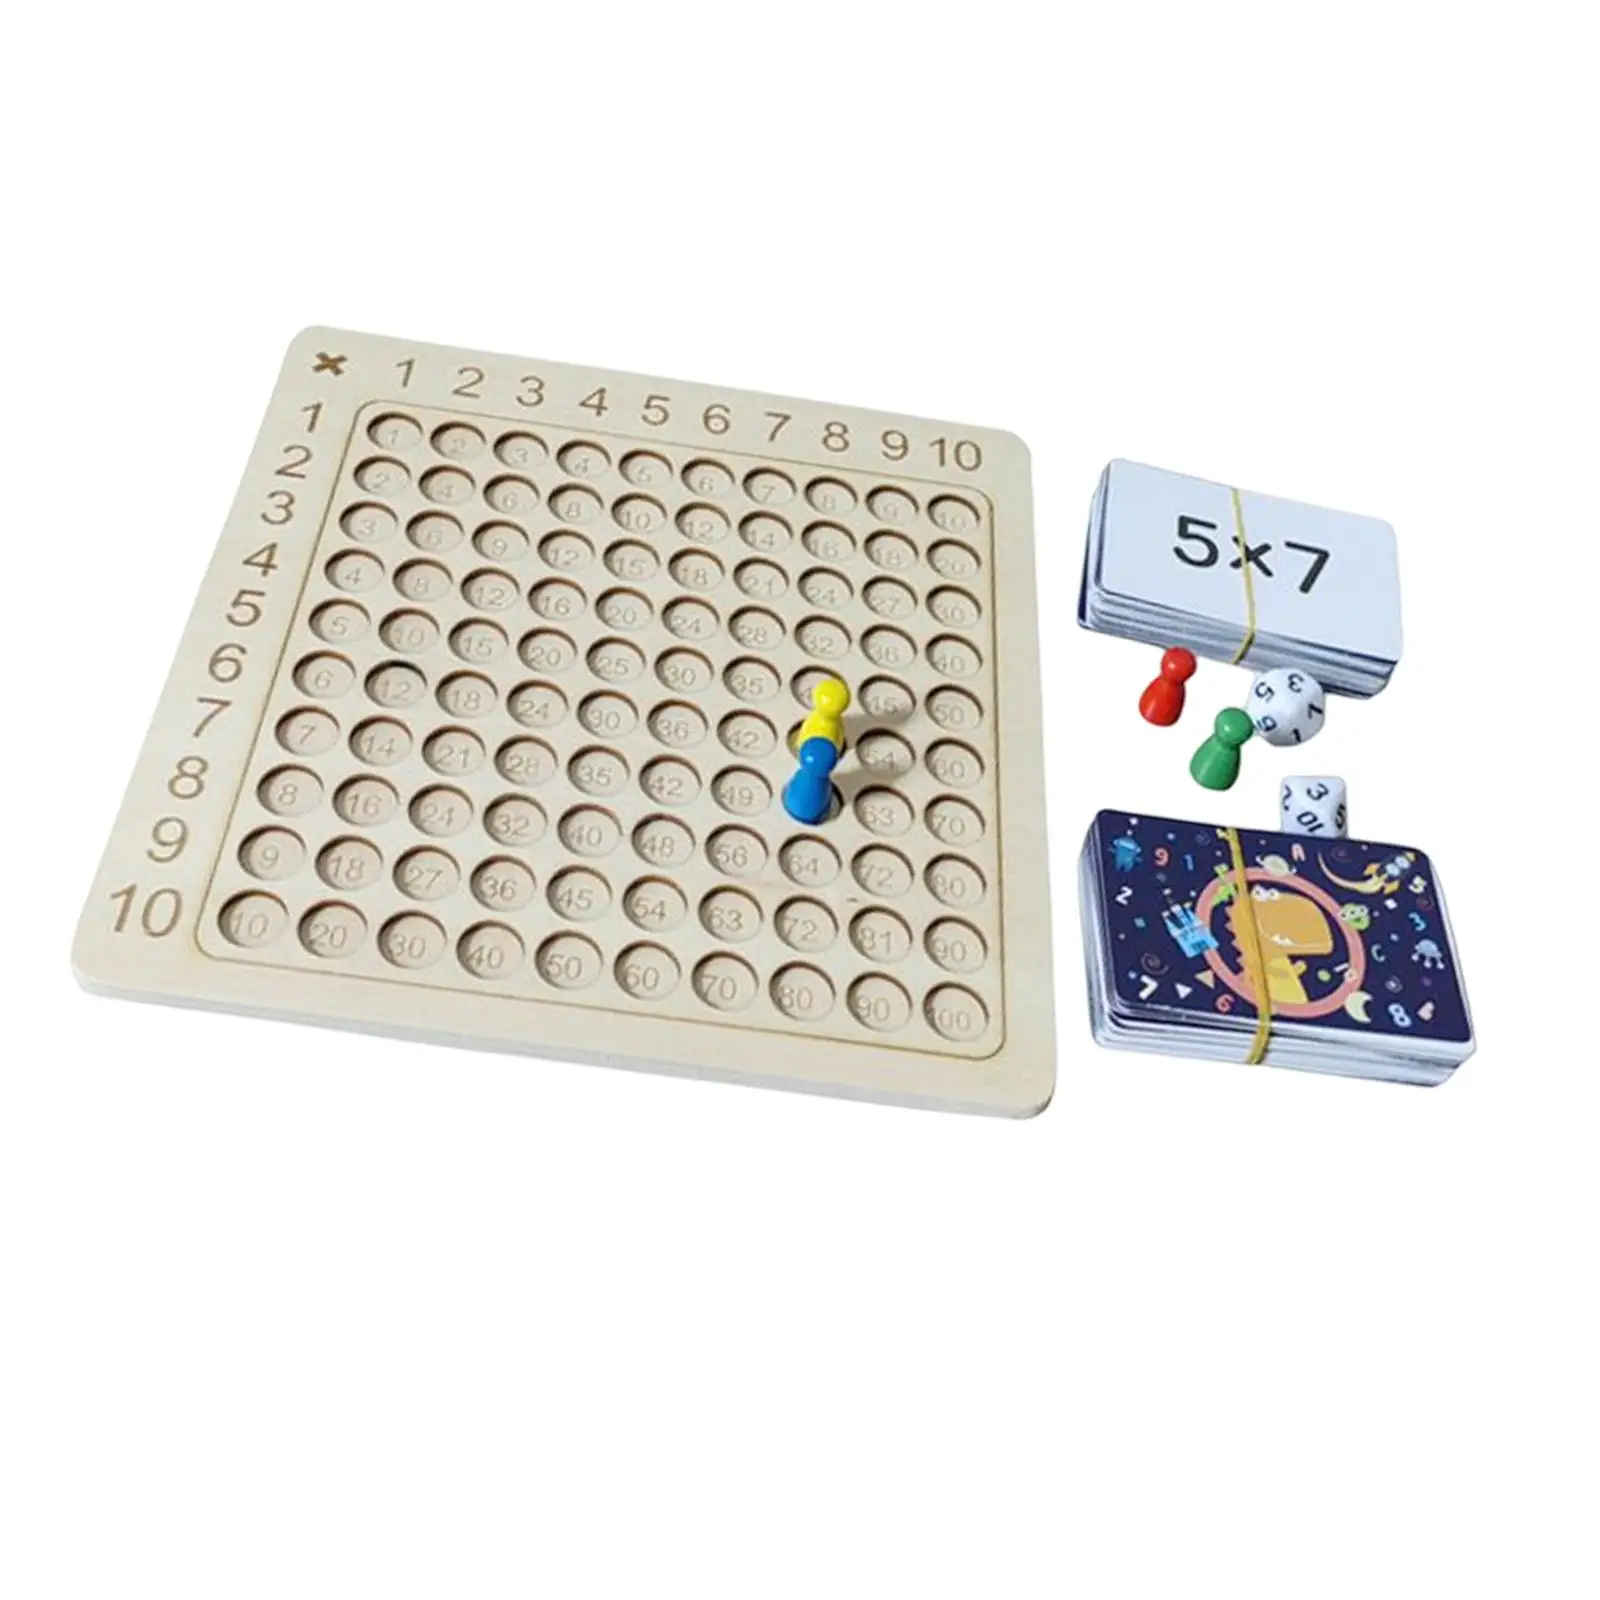 10x10 Multiplication Table Board Wooden with Numbers for Gift Children